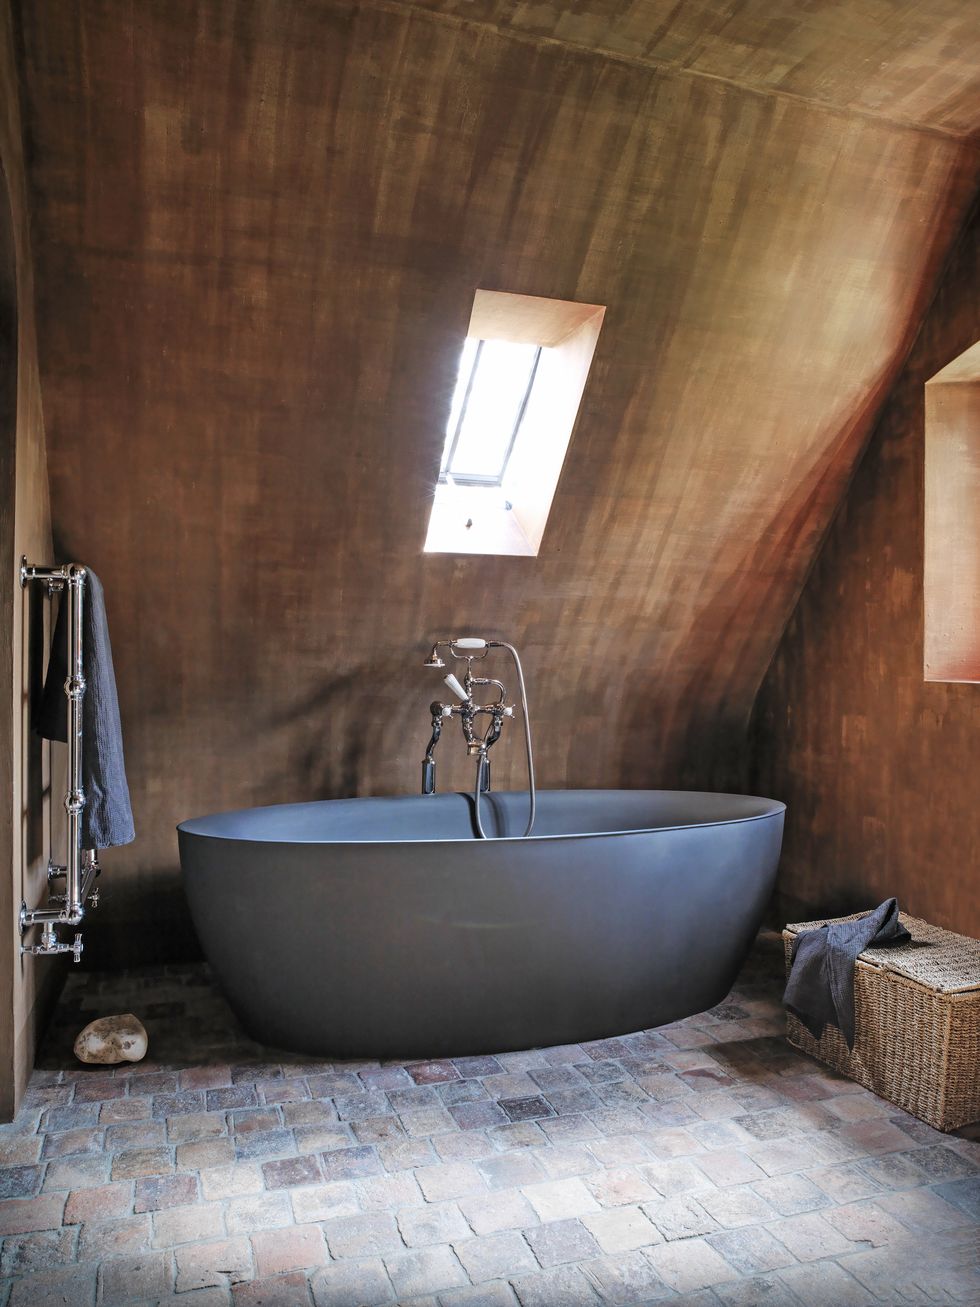 8 Spa-Like Bathrooms You'll Never Want to Leave